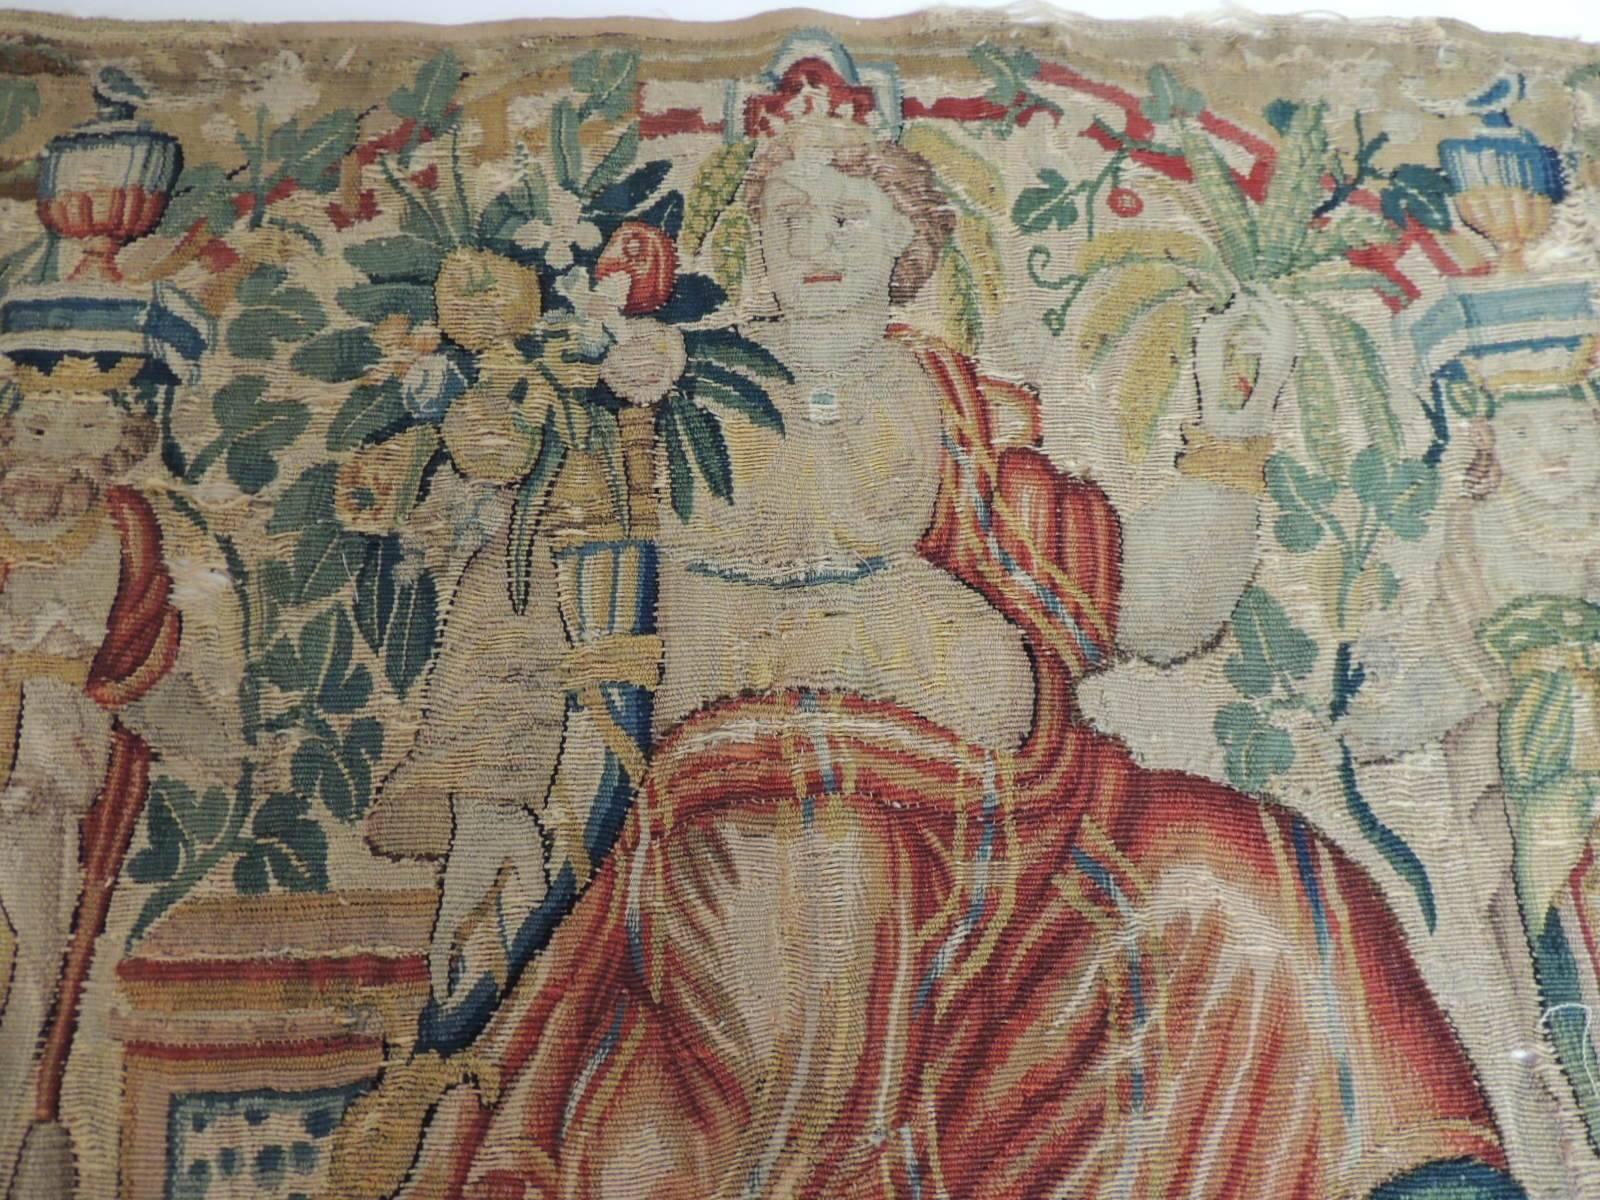 Offered by the Antique Textiles Galleries:
18th century Aubusson tapestry panel of goddess in a red cape.
Aubusson tapestry panel depicting scene of a goddess holding court in a garden arranging flowers with draped red cape and holding a cornucopia